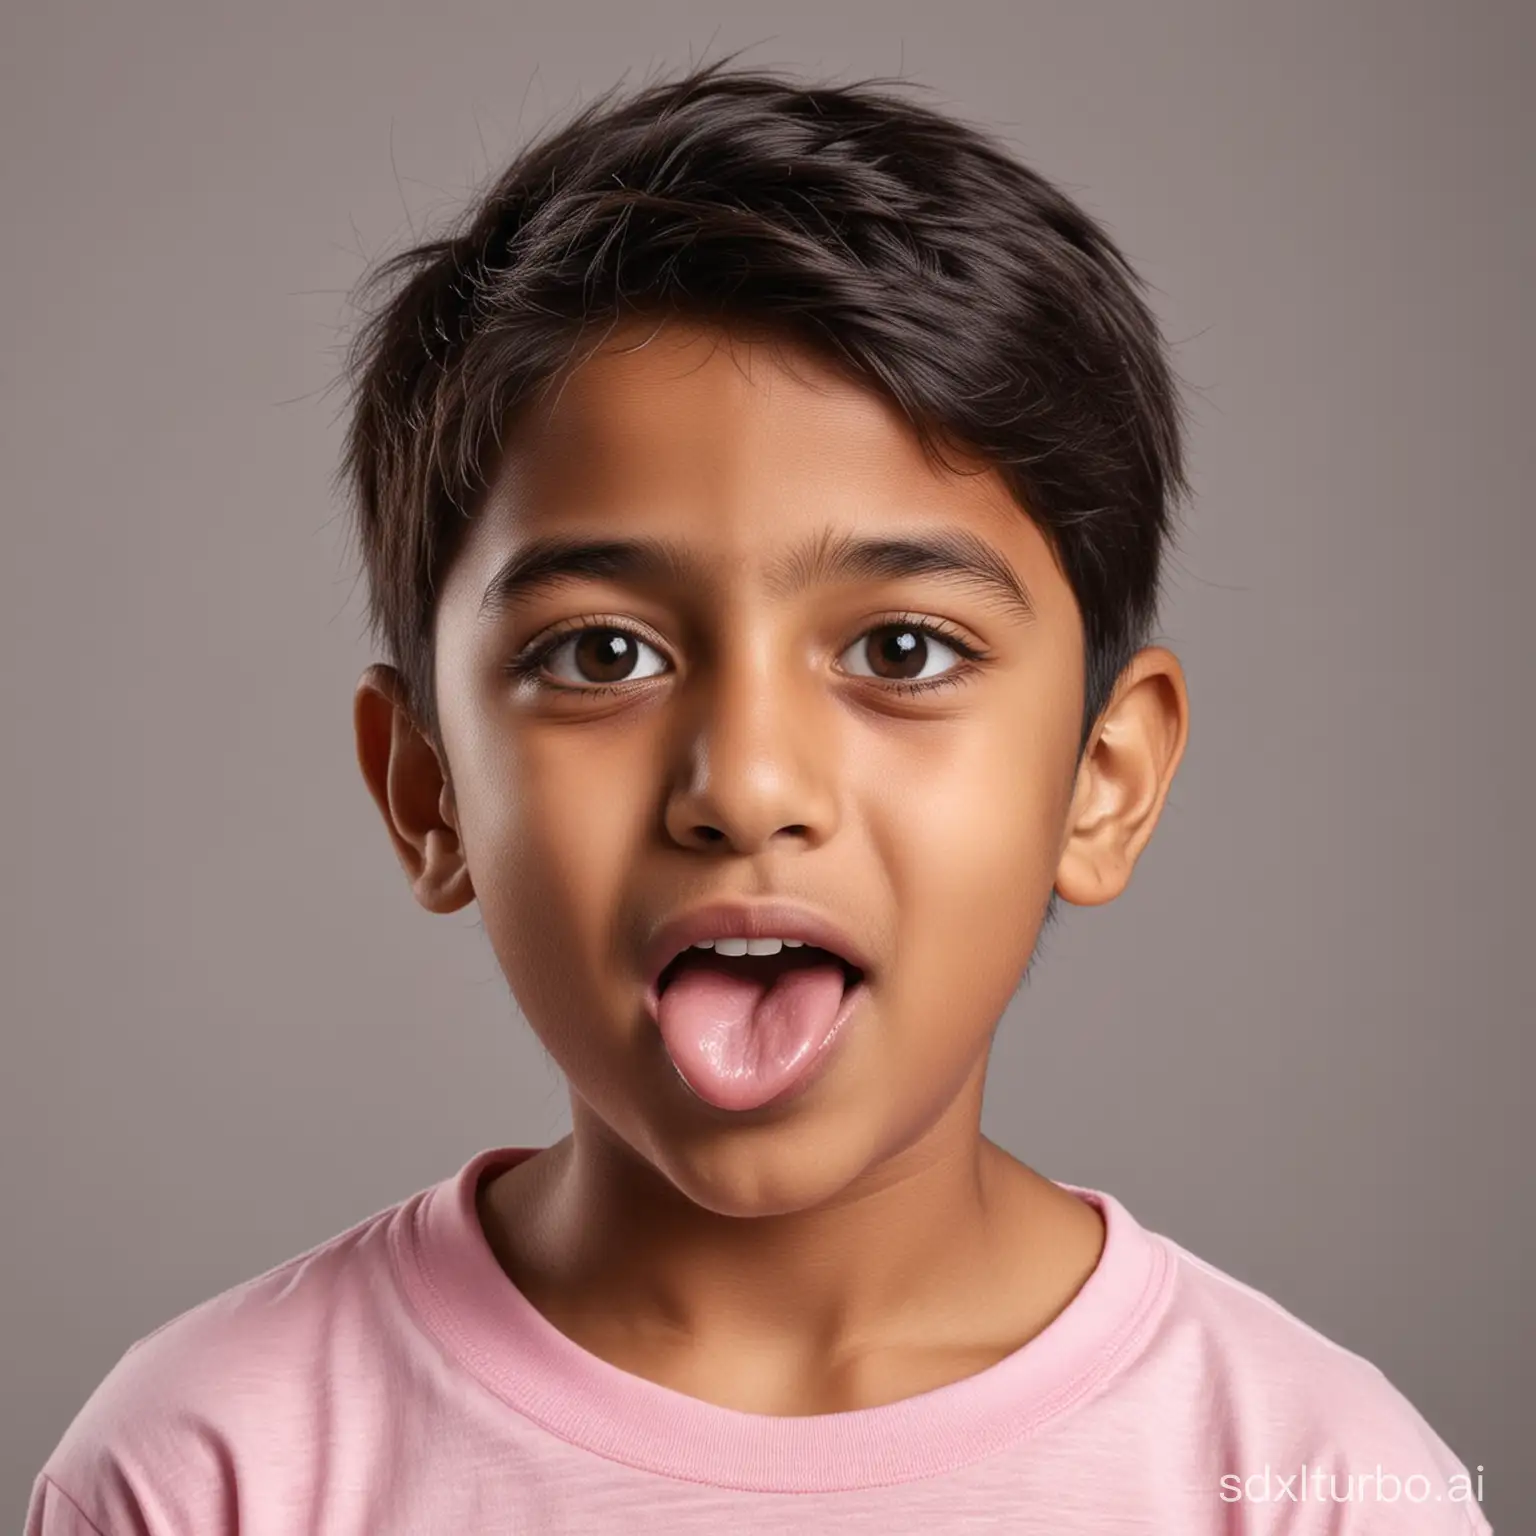 Adorable-Indian-Boy-with-Playful-Selfie-Expression-and-Chocolate-Nose